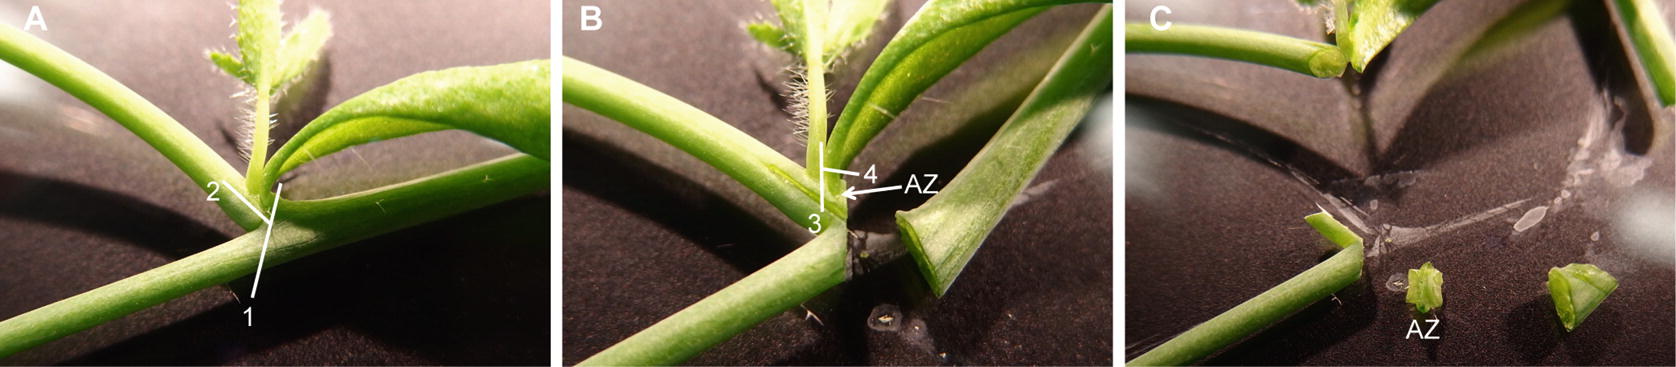 Quantification Of Cauline Leaf Abscission In Response To Plant